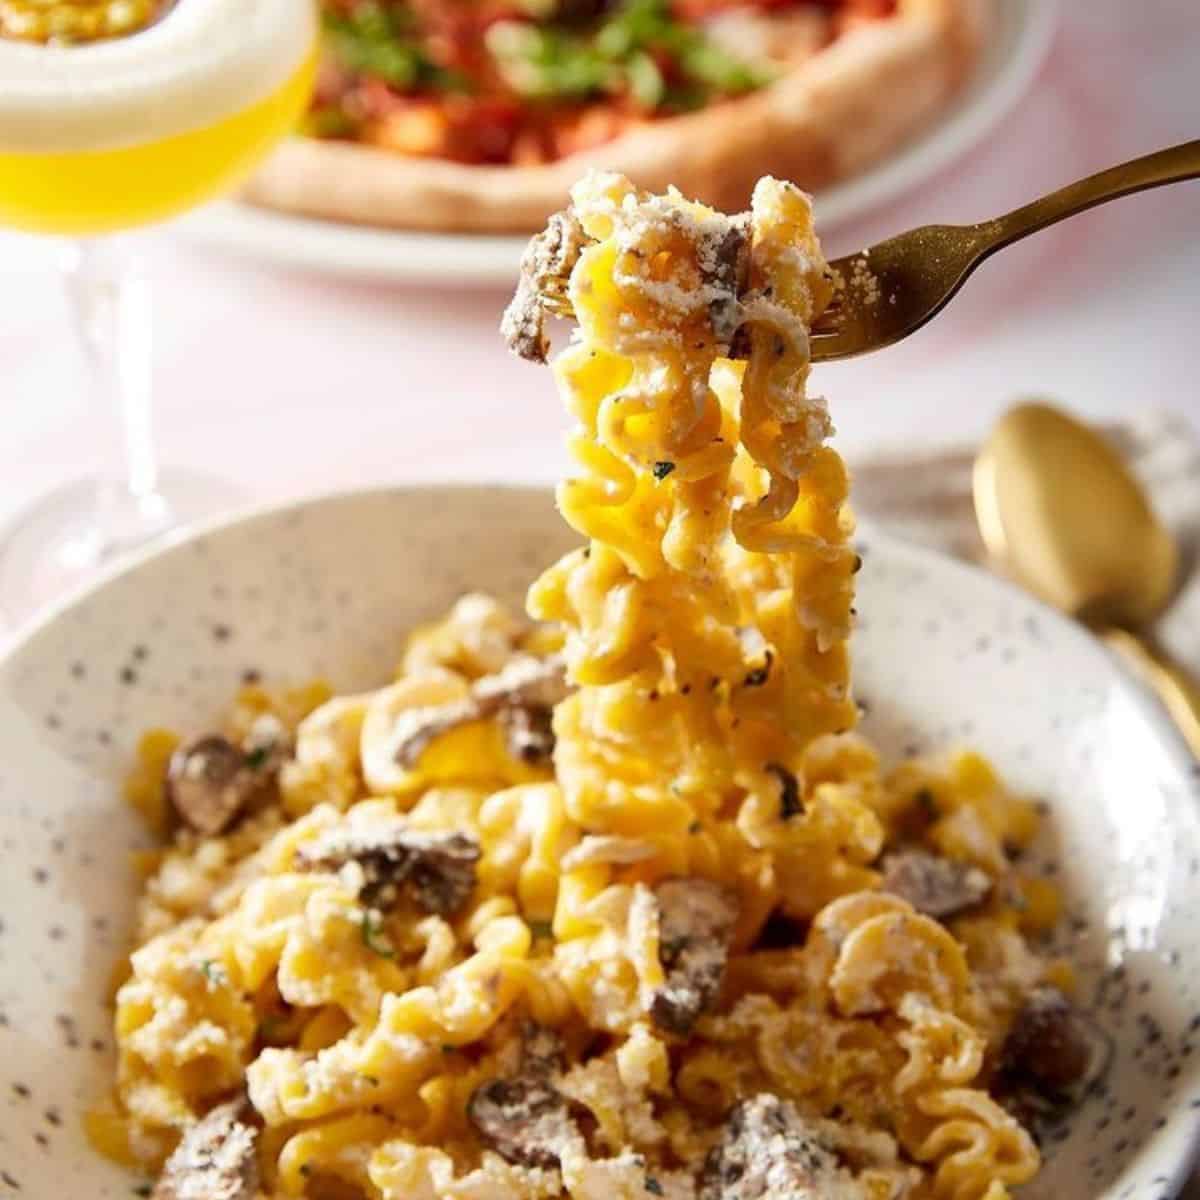 a portion of cheesy pasta with cocktail on side Bella Italia